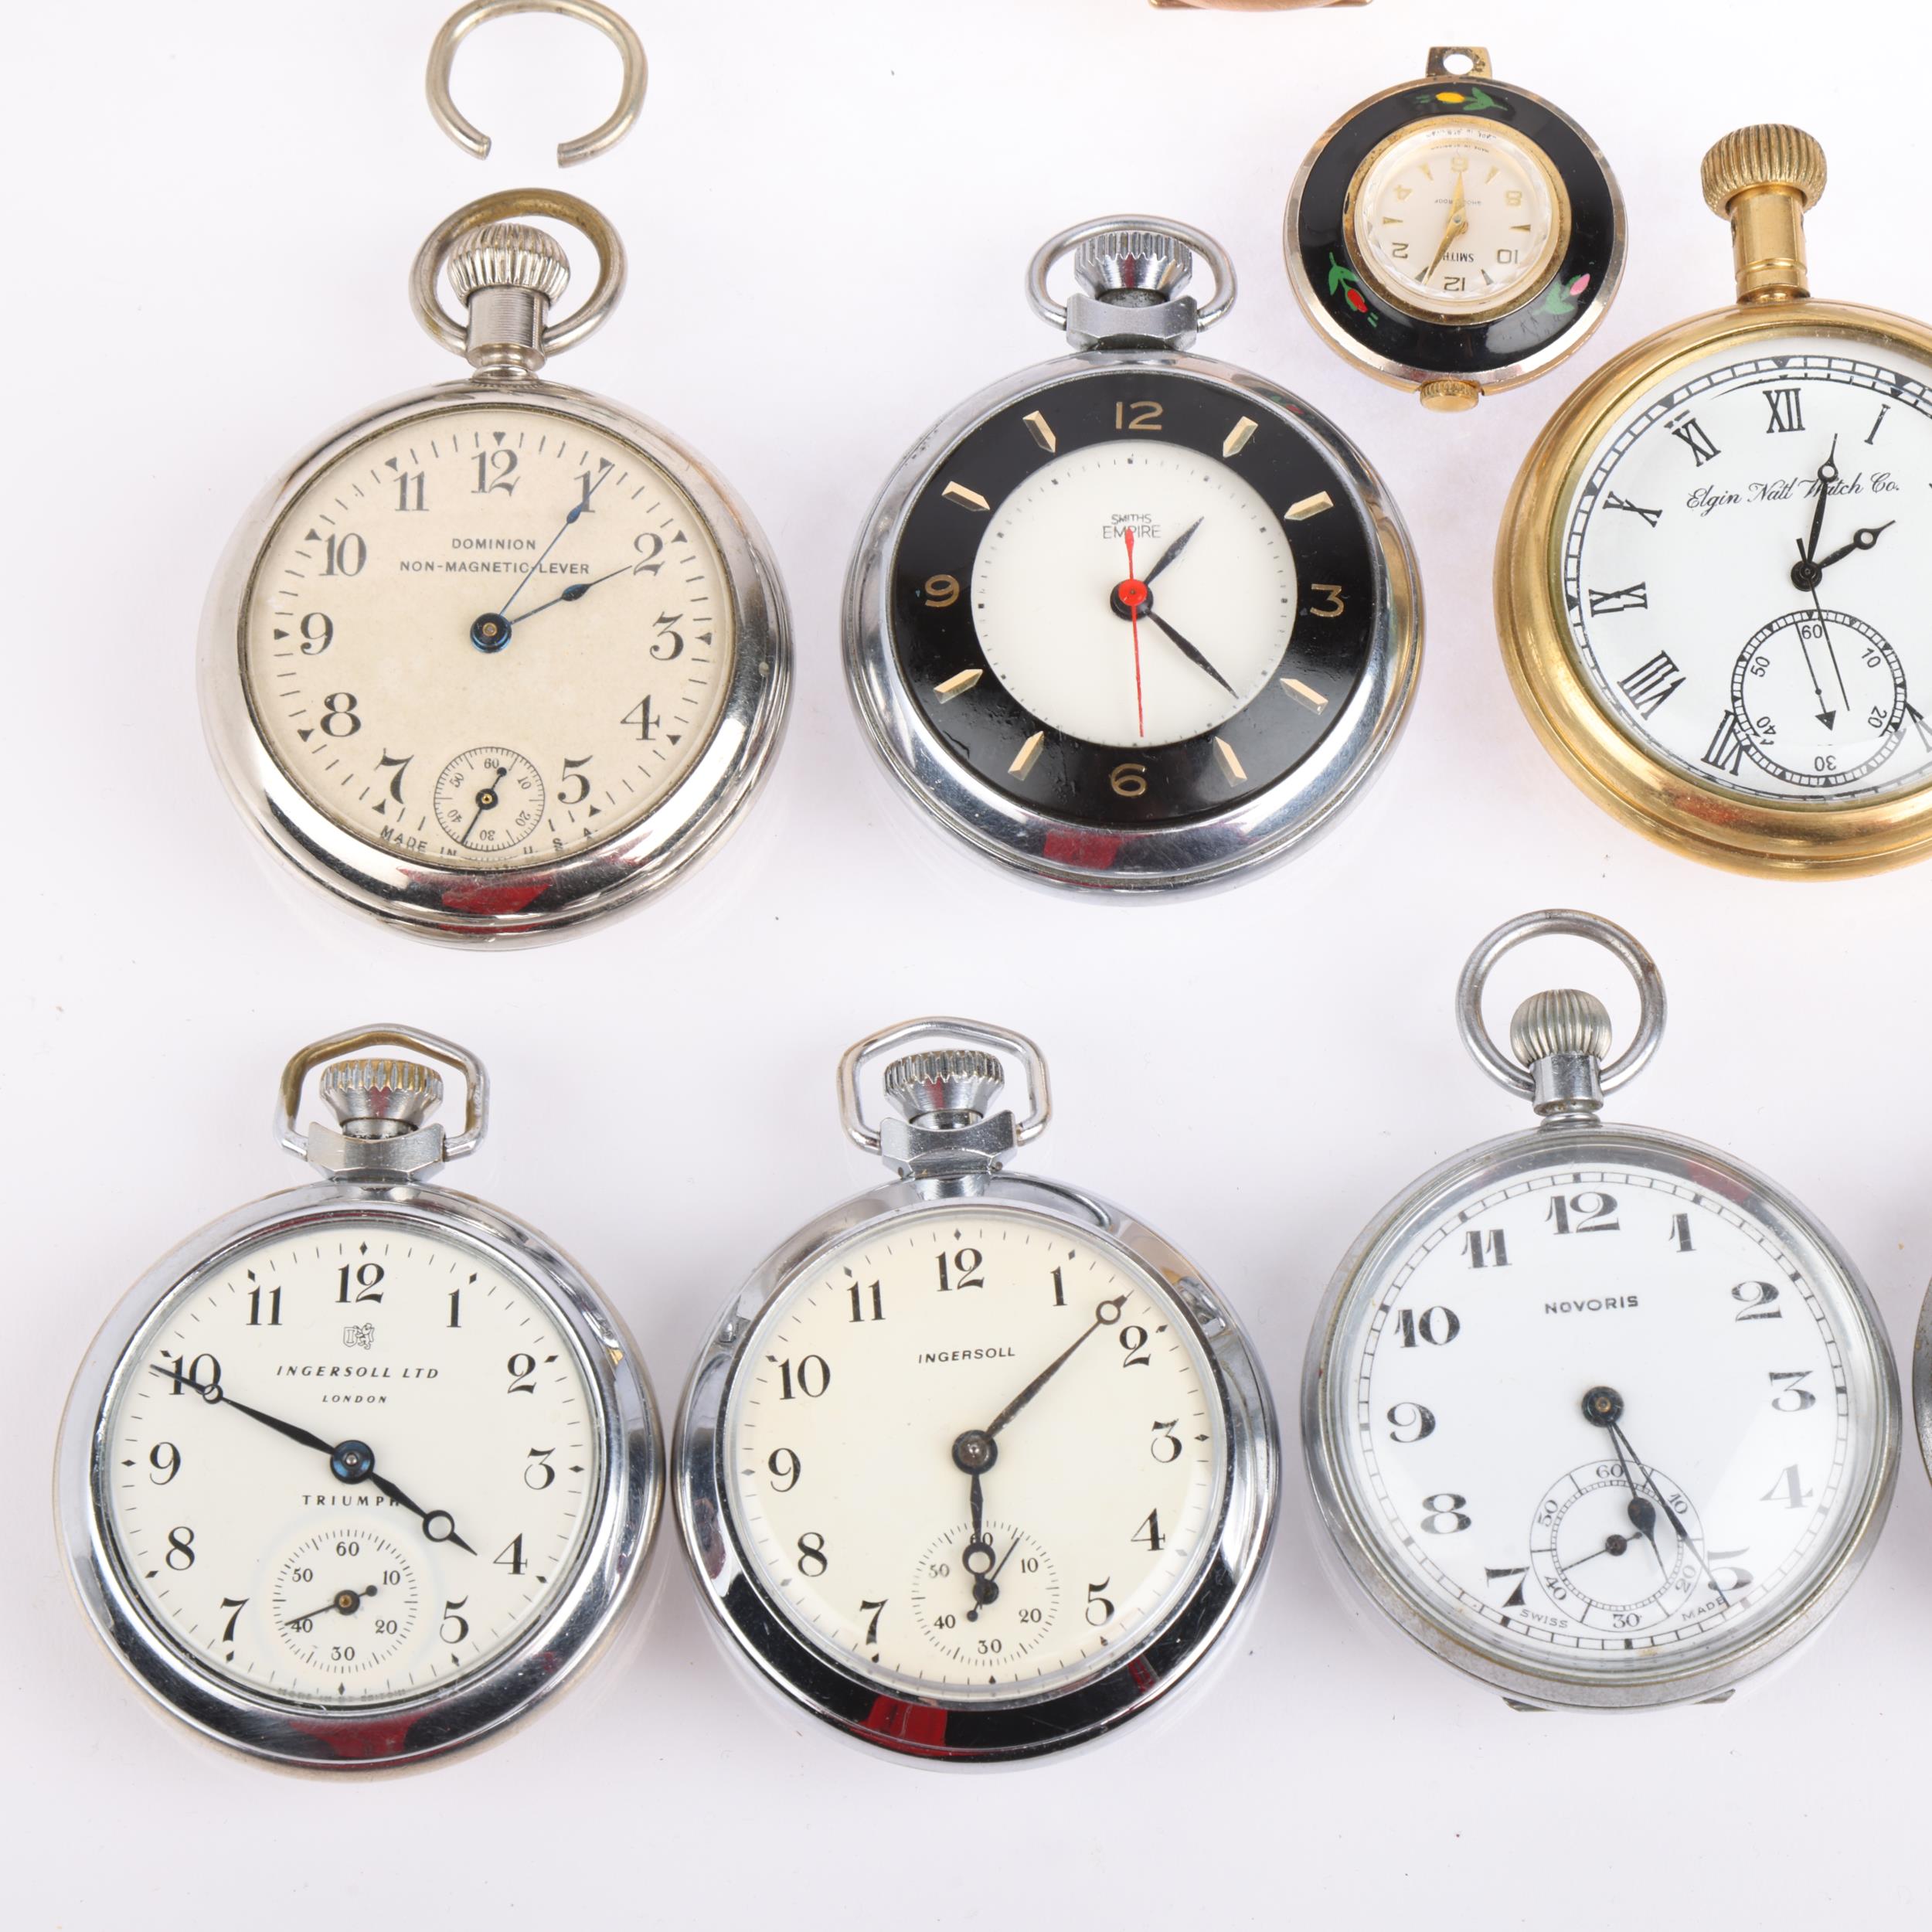 A quantity of pocket watches, makers include Ingersoll, Services, Smiths Empire, etc Condition - Image 2 of 5